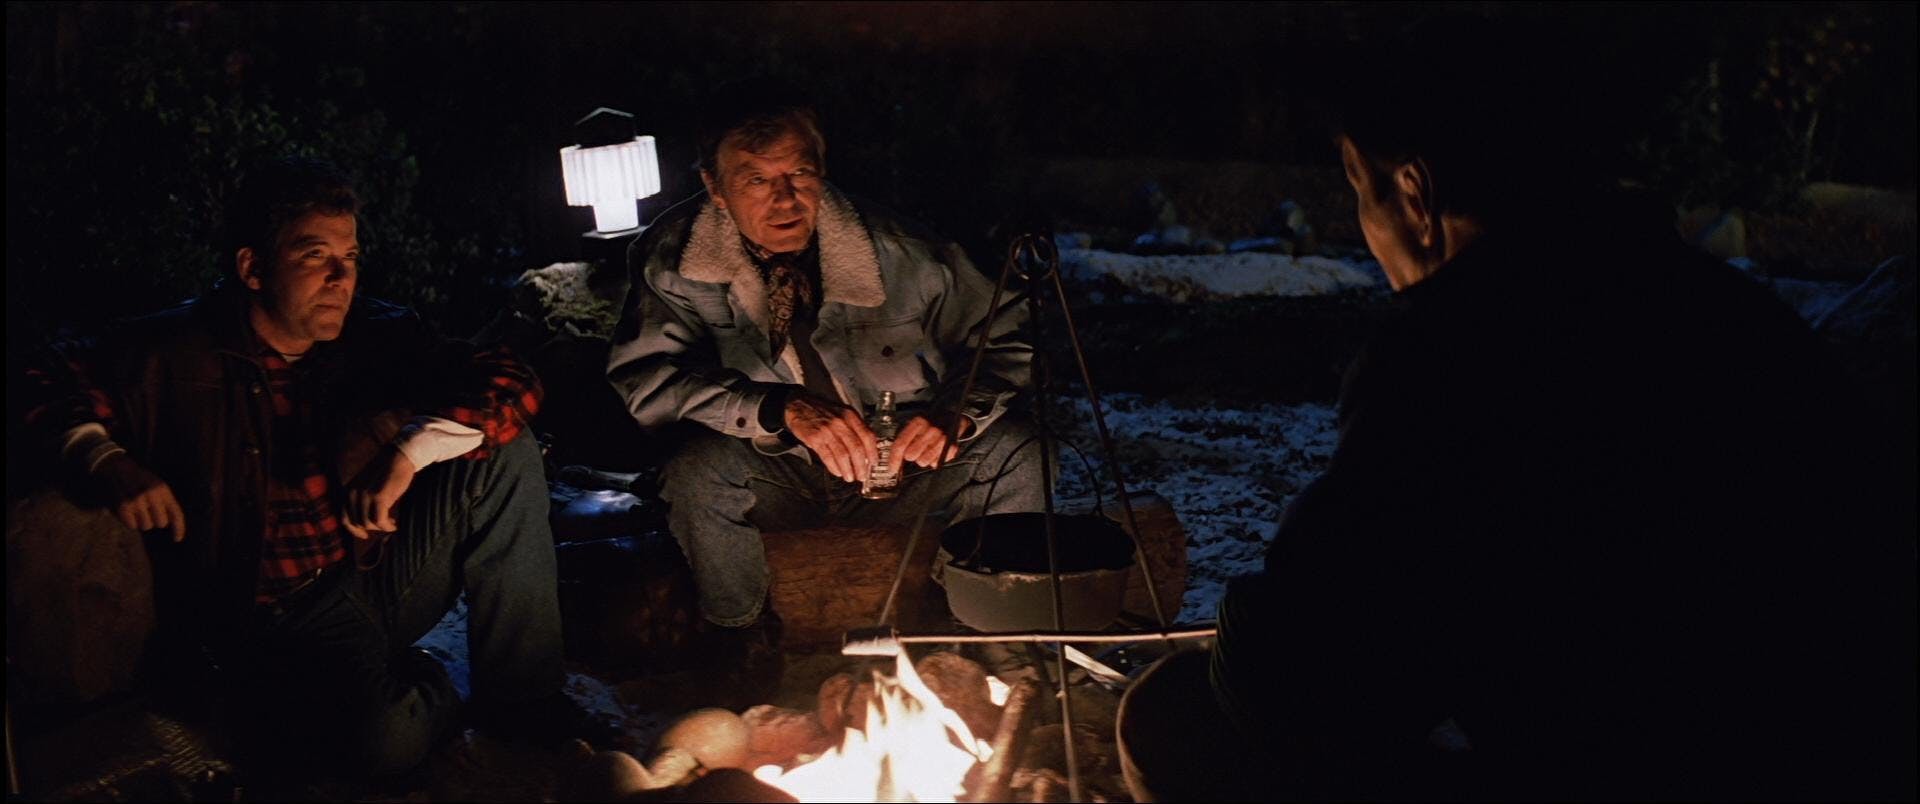 Kirk, McCoy, and Spock sit around a campfire in Star Trek V: The Final Frontier